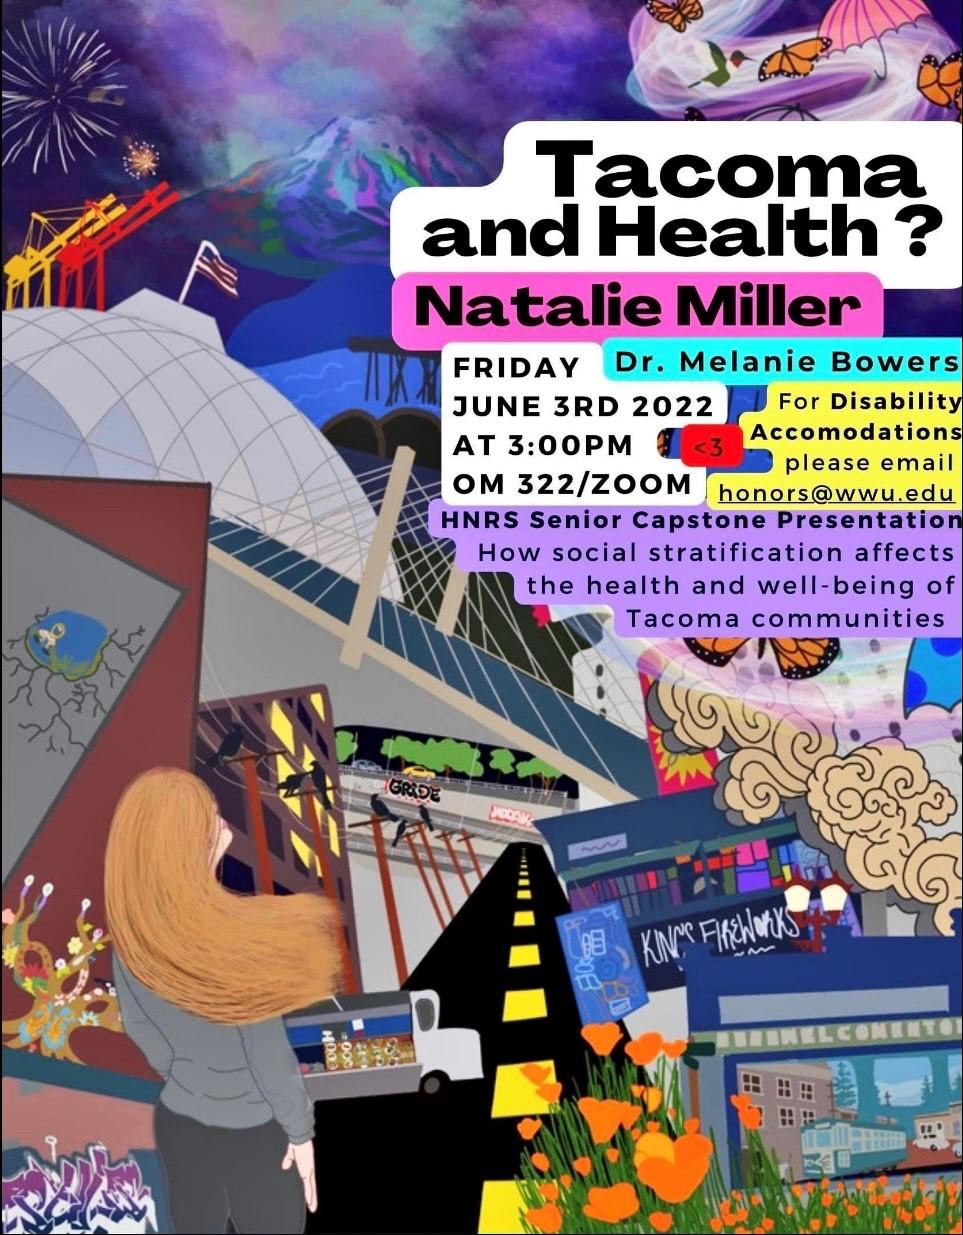 A colorful poster with a person facing a chaotic city. The text reads: "Tacoma and Health? By Natalie Miller. Advised by Dr. Melanie Bowers. Friday, June 3rd, 2022 At 3:00 PM. OM 322/Zoom. For Disability Accommodations, please email honors@wwu.edu. HNRS Senior Capstone Presentation. How social stratification affects the health and well-being of Tacoma communities."